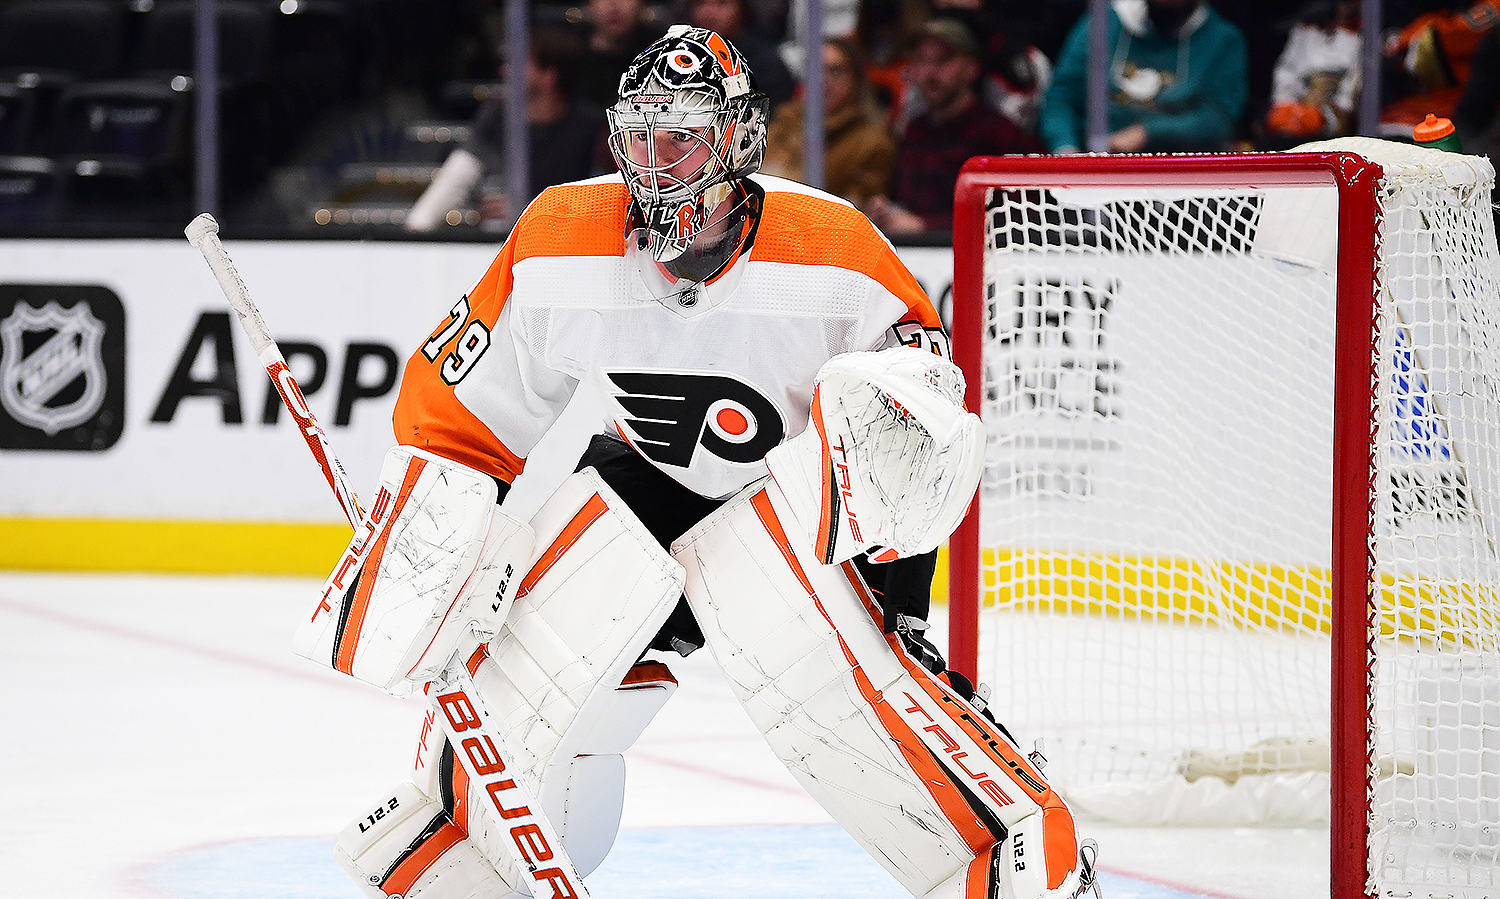 Flyers finish road trip 1-2-1, Hart sounds off on NHL's COVID-19 process